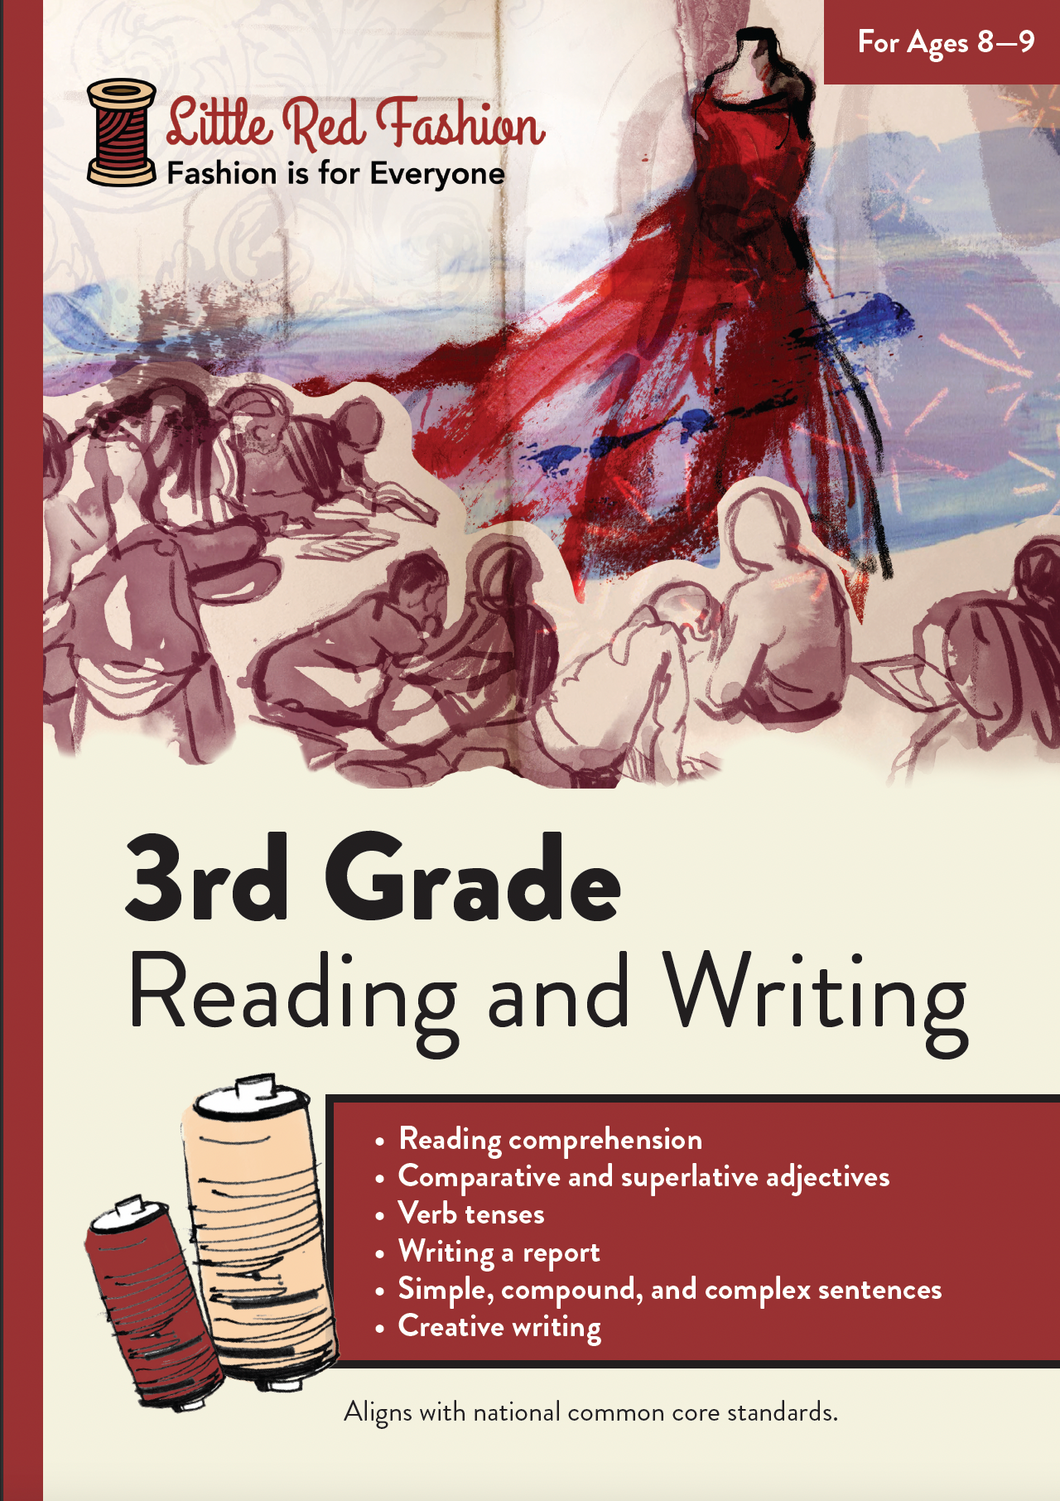 Grade 3 Reading and Writing Workbook by Little Red Fashion